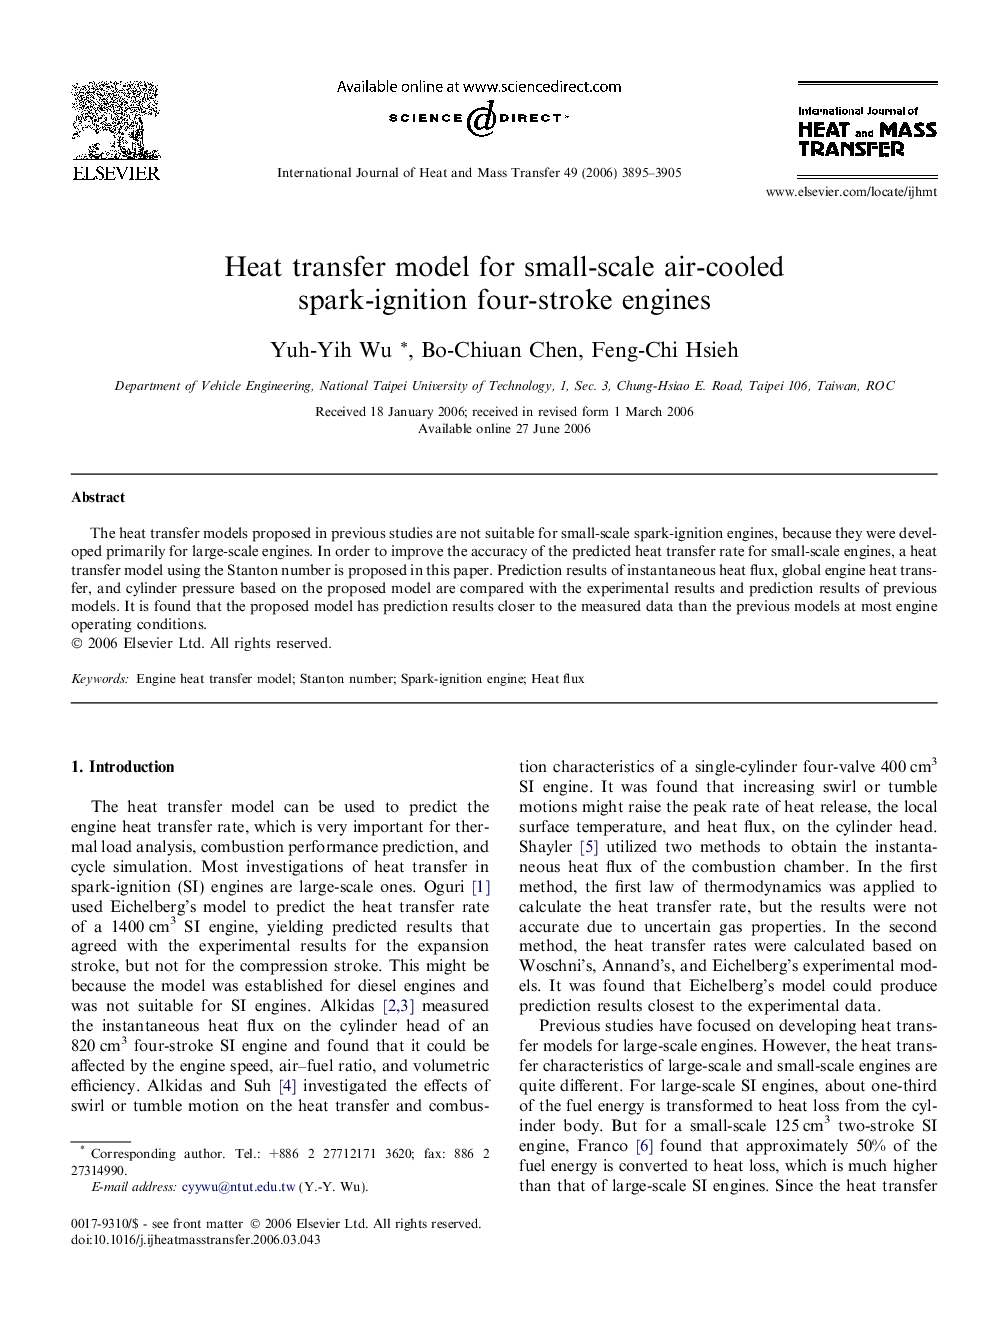 Heat transfer model for small-scale air-cooled spark-ignition four-stroke engines